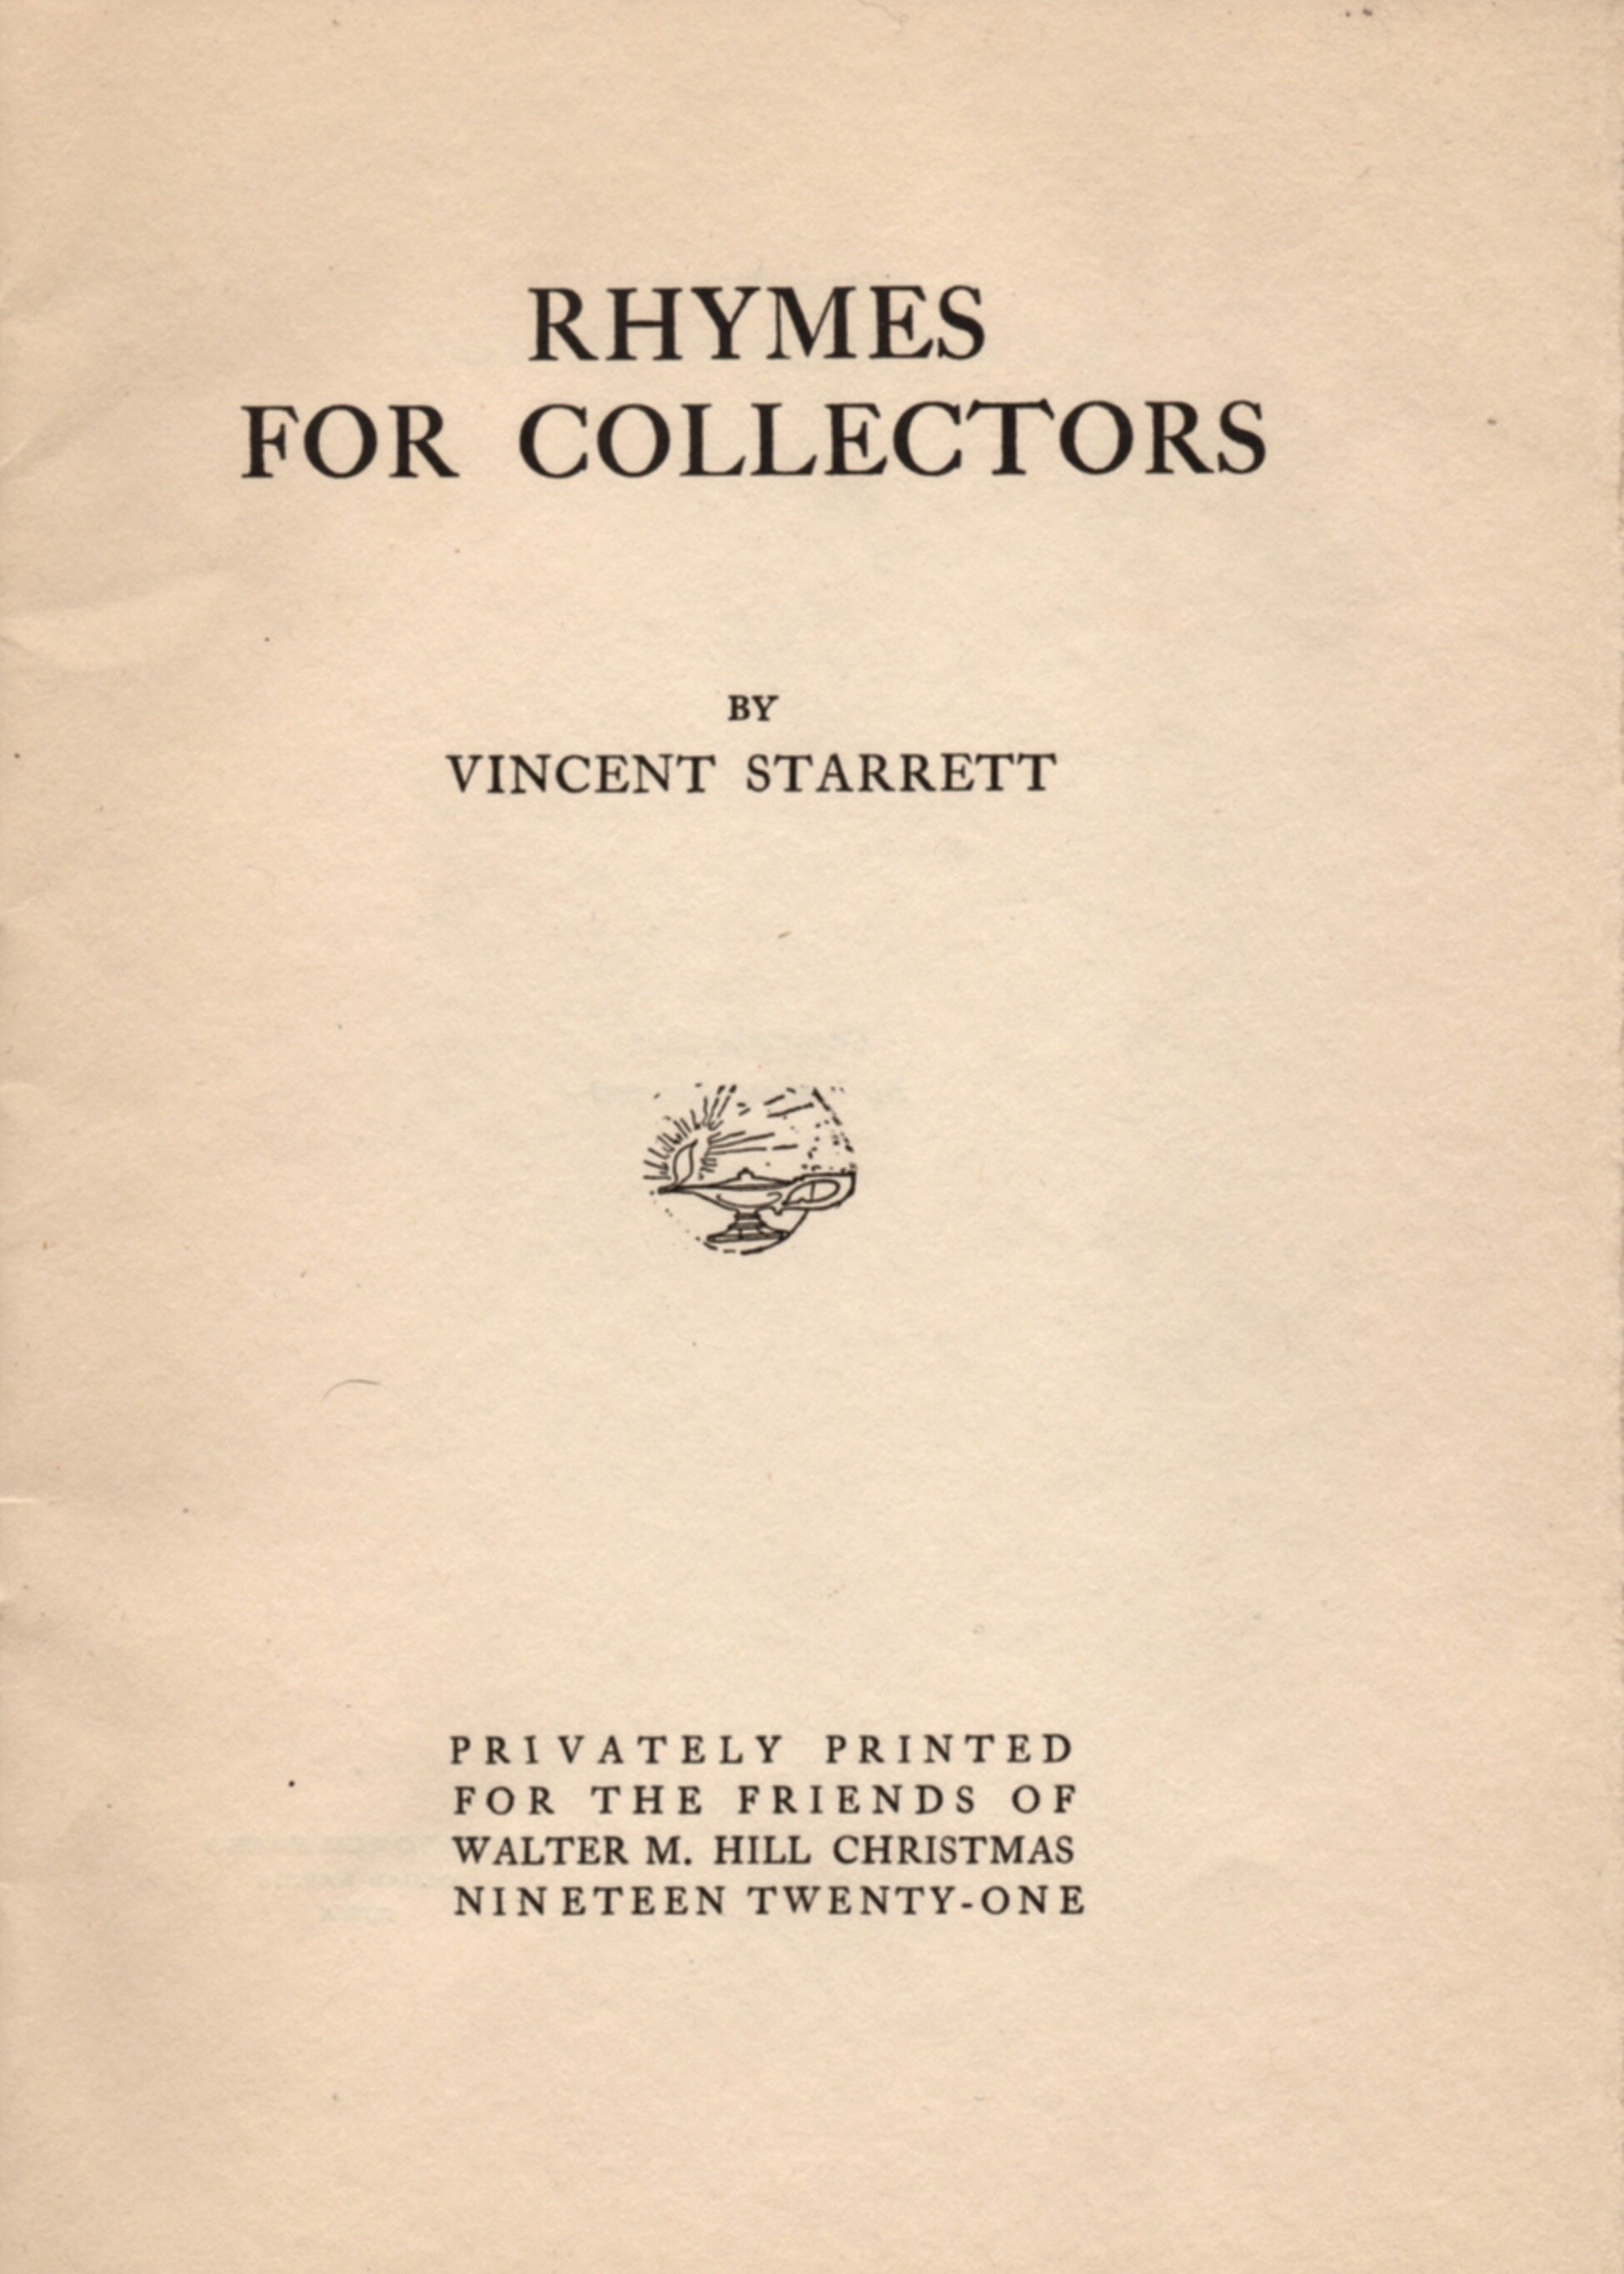 Rhymes for Collectors title page.jpeg